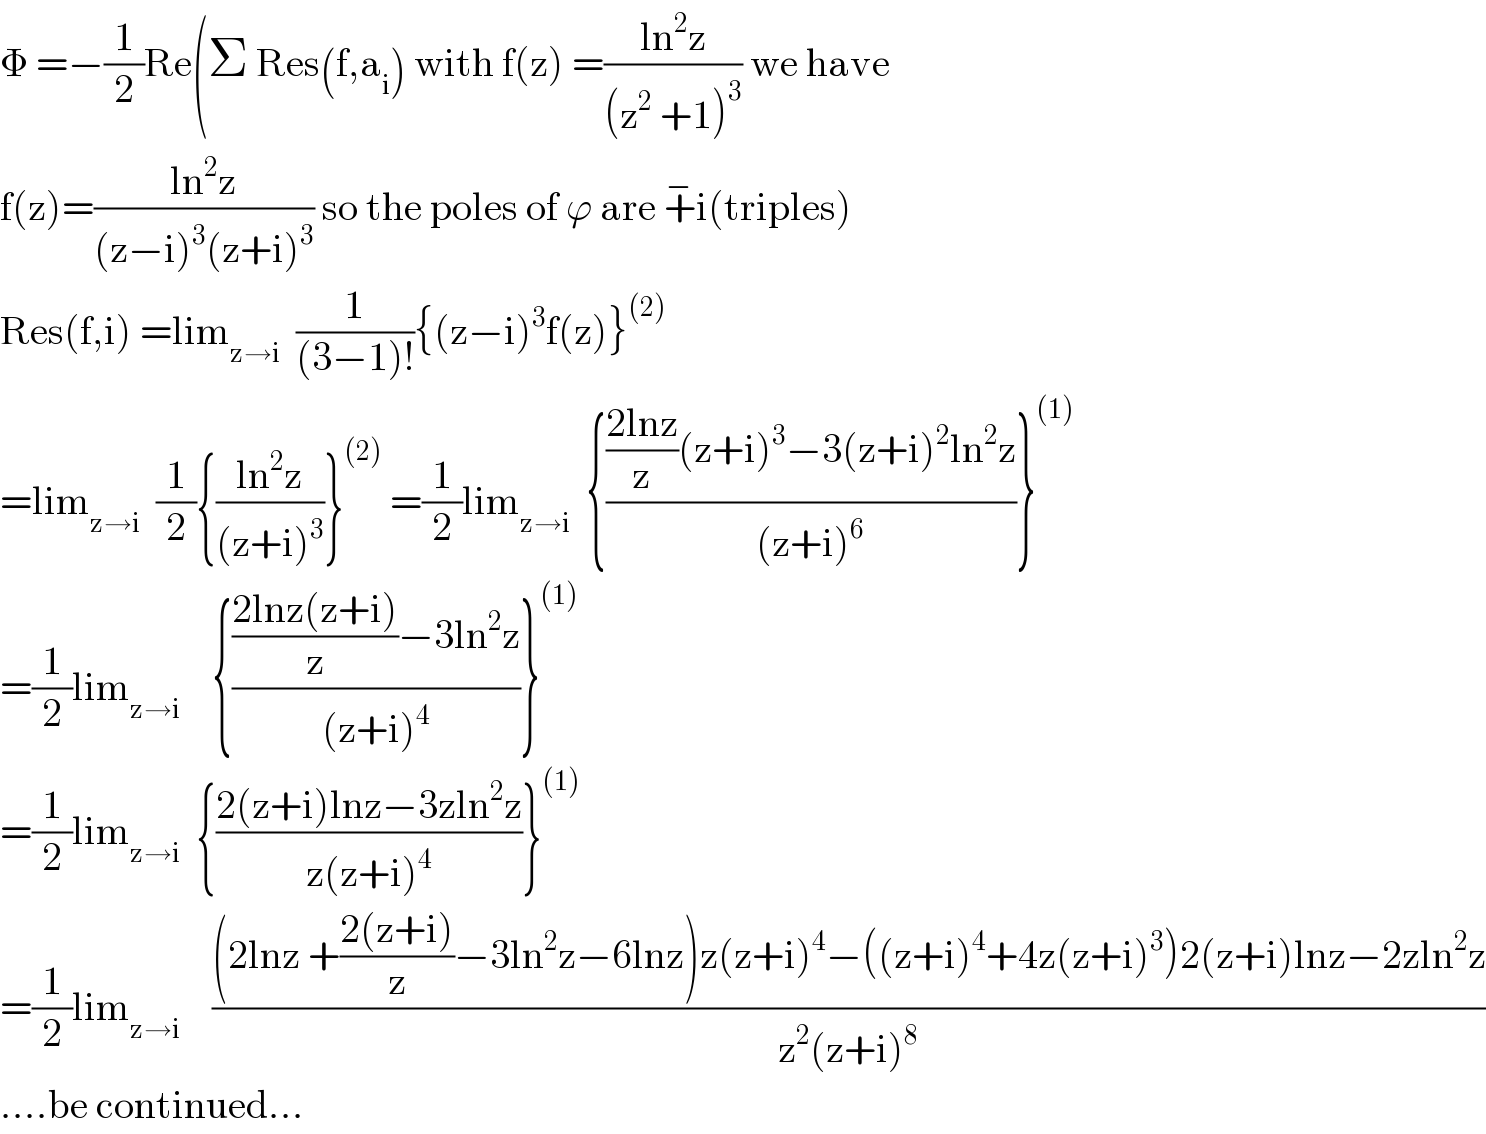 Φ =−(1/2)Re(Σ Res(f,a_i ) with f(z) =((ln^2 z)/((z^2  +1)^3 )) we have   f(z)=((ln^2 z)/((z−i)^3 (z+i)^3 )) so the poles of ϕ are +^− i(triples)  Res(f,i) =lim_(z→i)   (1/((3−1)!)){(z−i)^3 f(z)}^((2))   =lim_(z→i)   (1/2){((ln^2 z)/((z+i)^3 ))}^((2))  =(1/2)lim_(z→i)   {((((2lnz)/z)(z+i)^3 −3(z+i)^2 ln^2 z)/((z+i)^6 ))}^((1))   =(1/2)lim_(z→i)     {((((2lnz(z+i))/z)−3ln^2 z)/((z+i)^4 ))}^((1))   =(1/2)lim_(z→i)   {((2(z+i)lnz−3zln^2 z)/(z(z+i)^4 ))}^((1))   =(1/2)lim_(z→i)     (((2lnz +((2(z+i))/z)−3ln^2 z−6lnz)z(z+i)^4 −((z+i)^4 +4z(z+i)^3 )2(z+i)lnz−2zln^2 z)/(z^2 (z+i)^8 ))  ....be continued...  